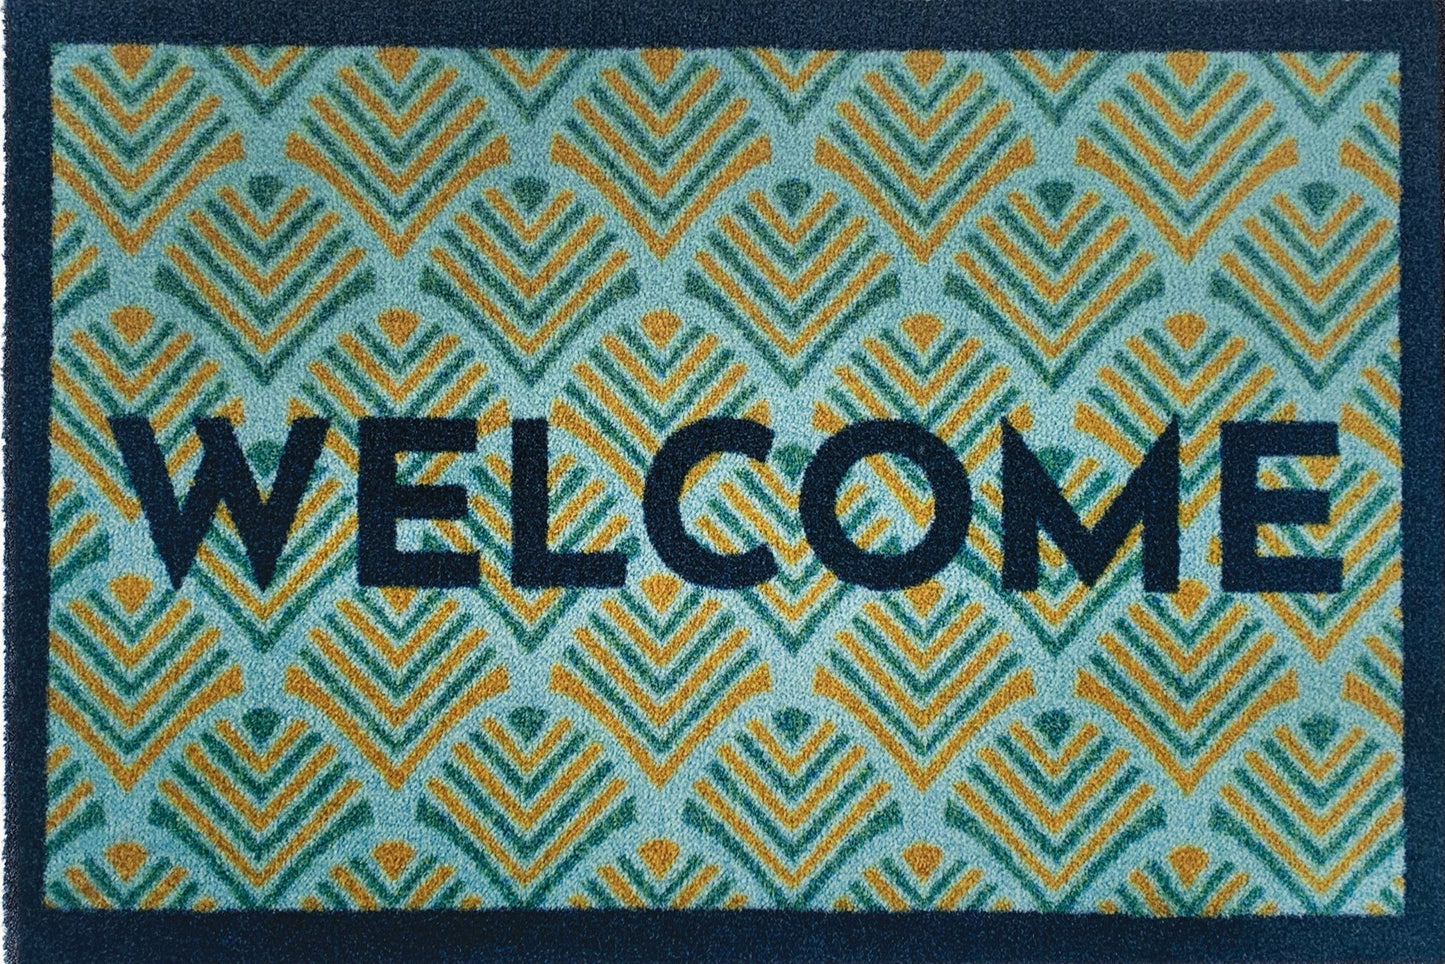 My Mat - Welcome